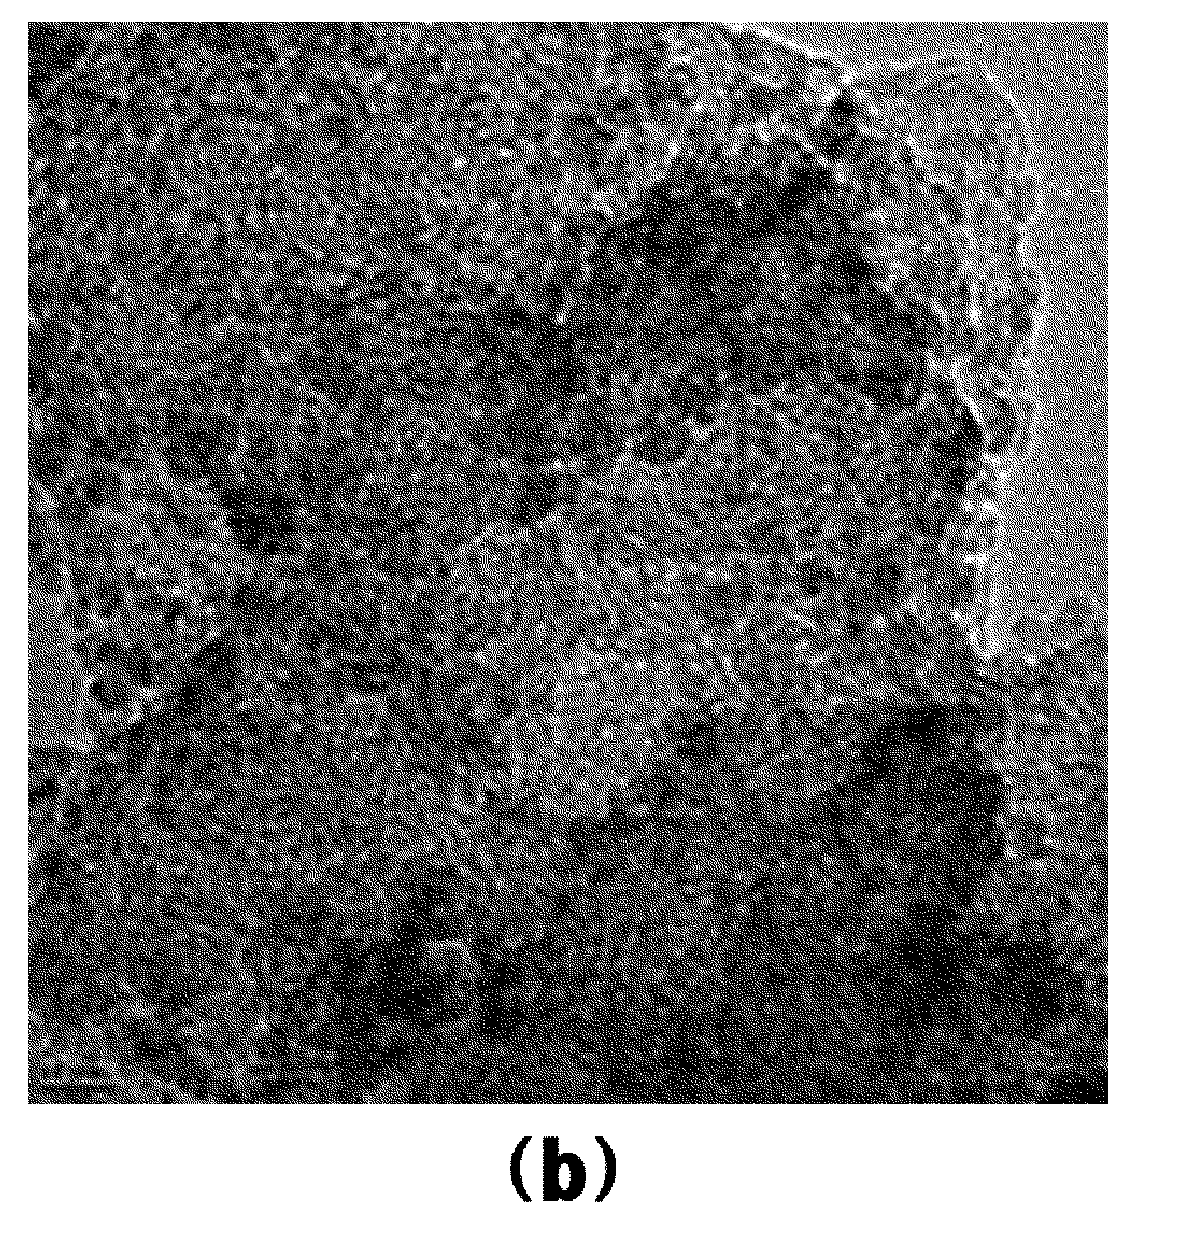 Method for preparing nano-sized metal particles on a carbon support